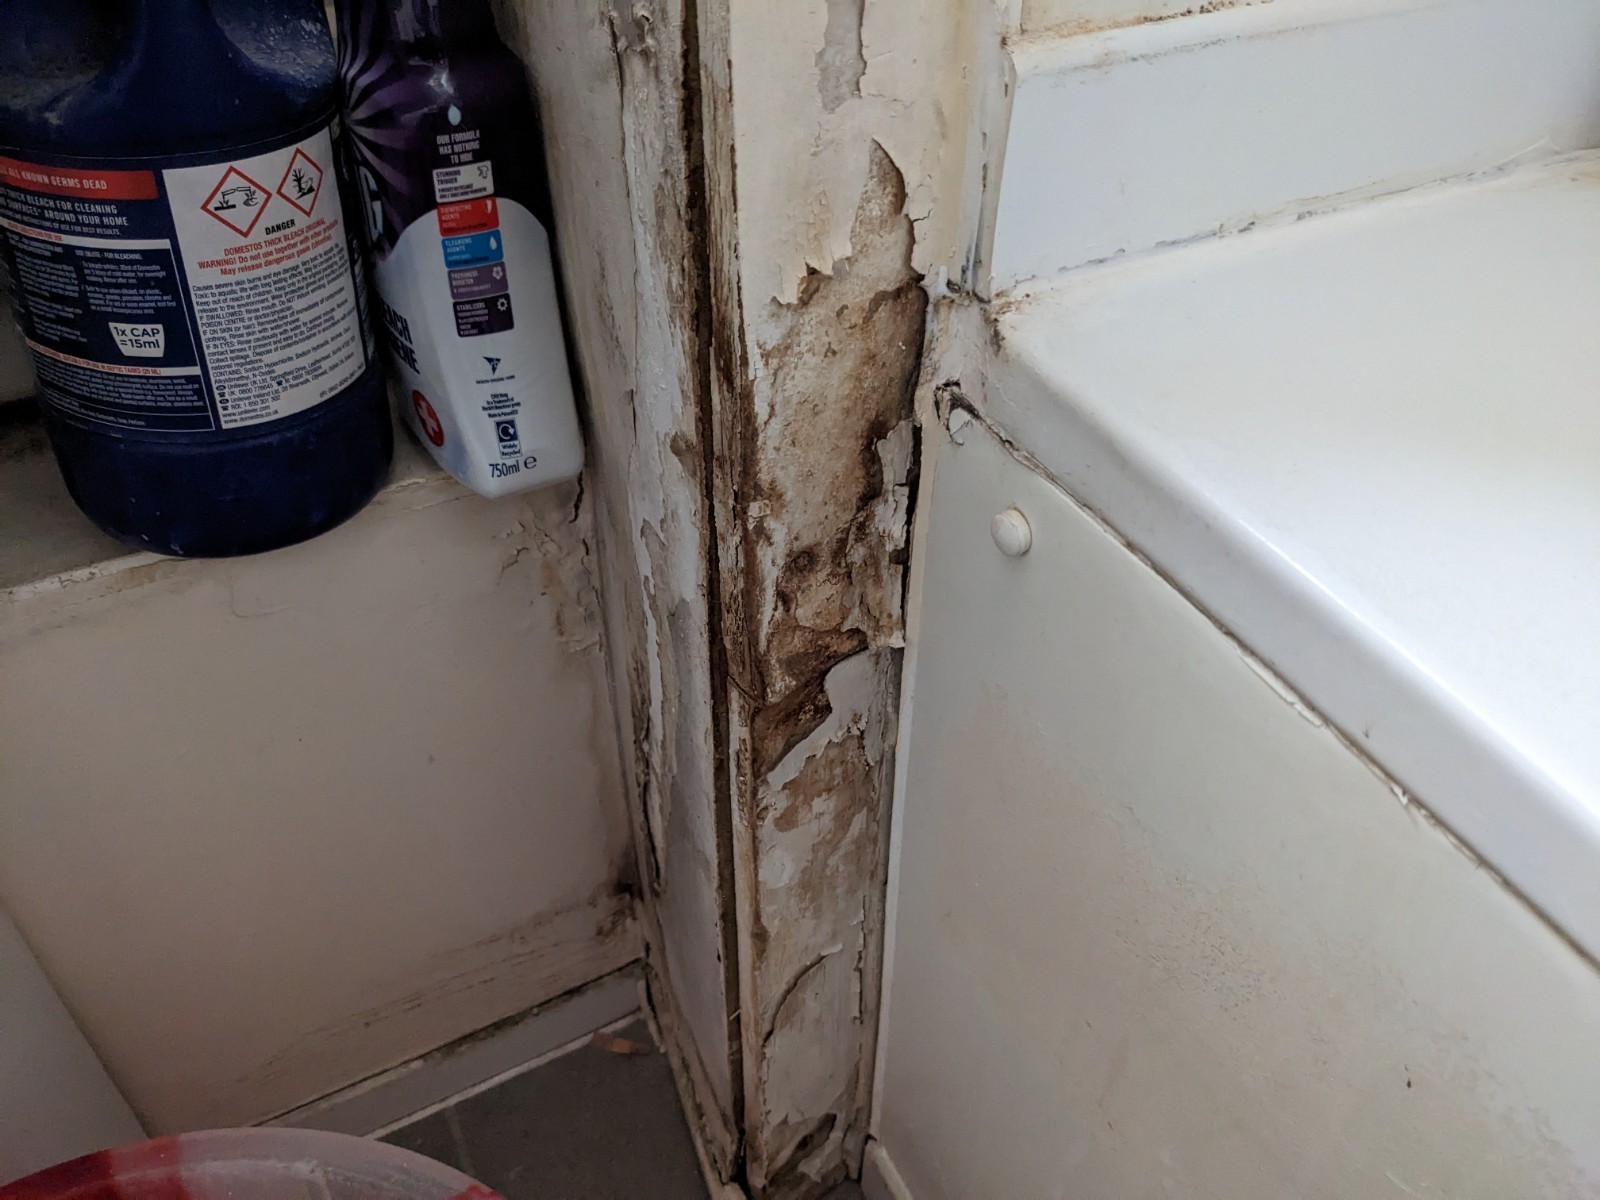 Mould and damp in council flat Kenninghall Road, Hackney, pic Julia Gregory, free for use by partners of BBC news wire service